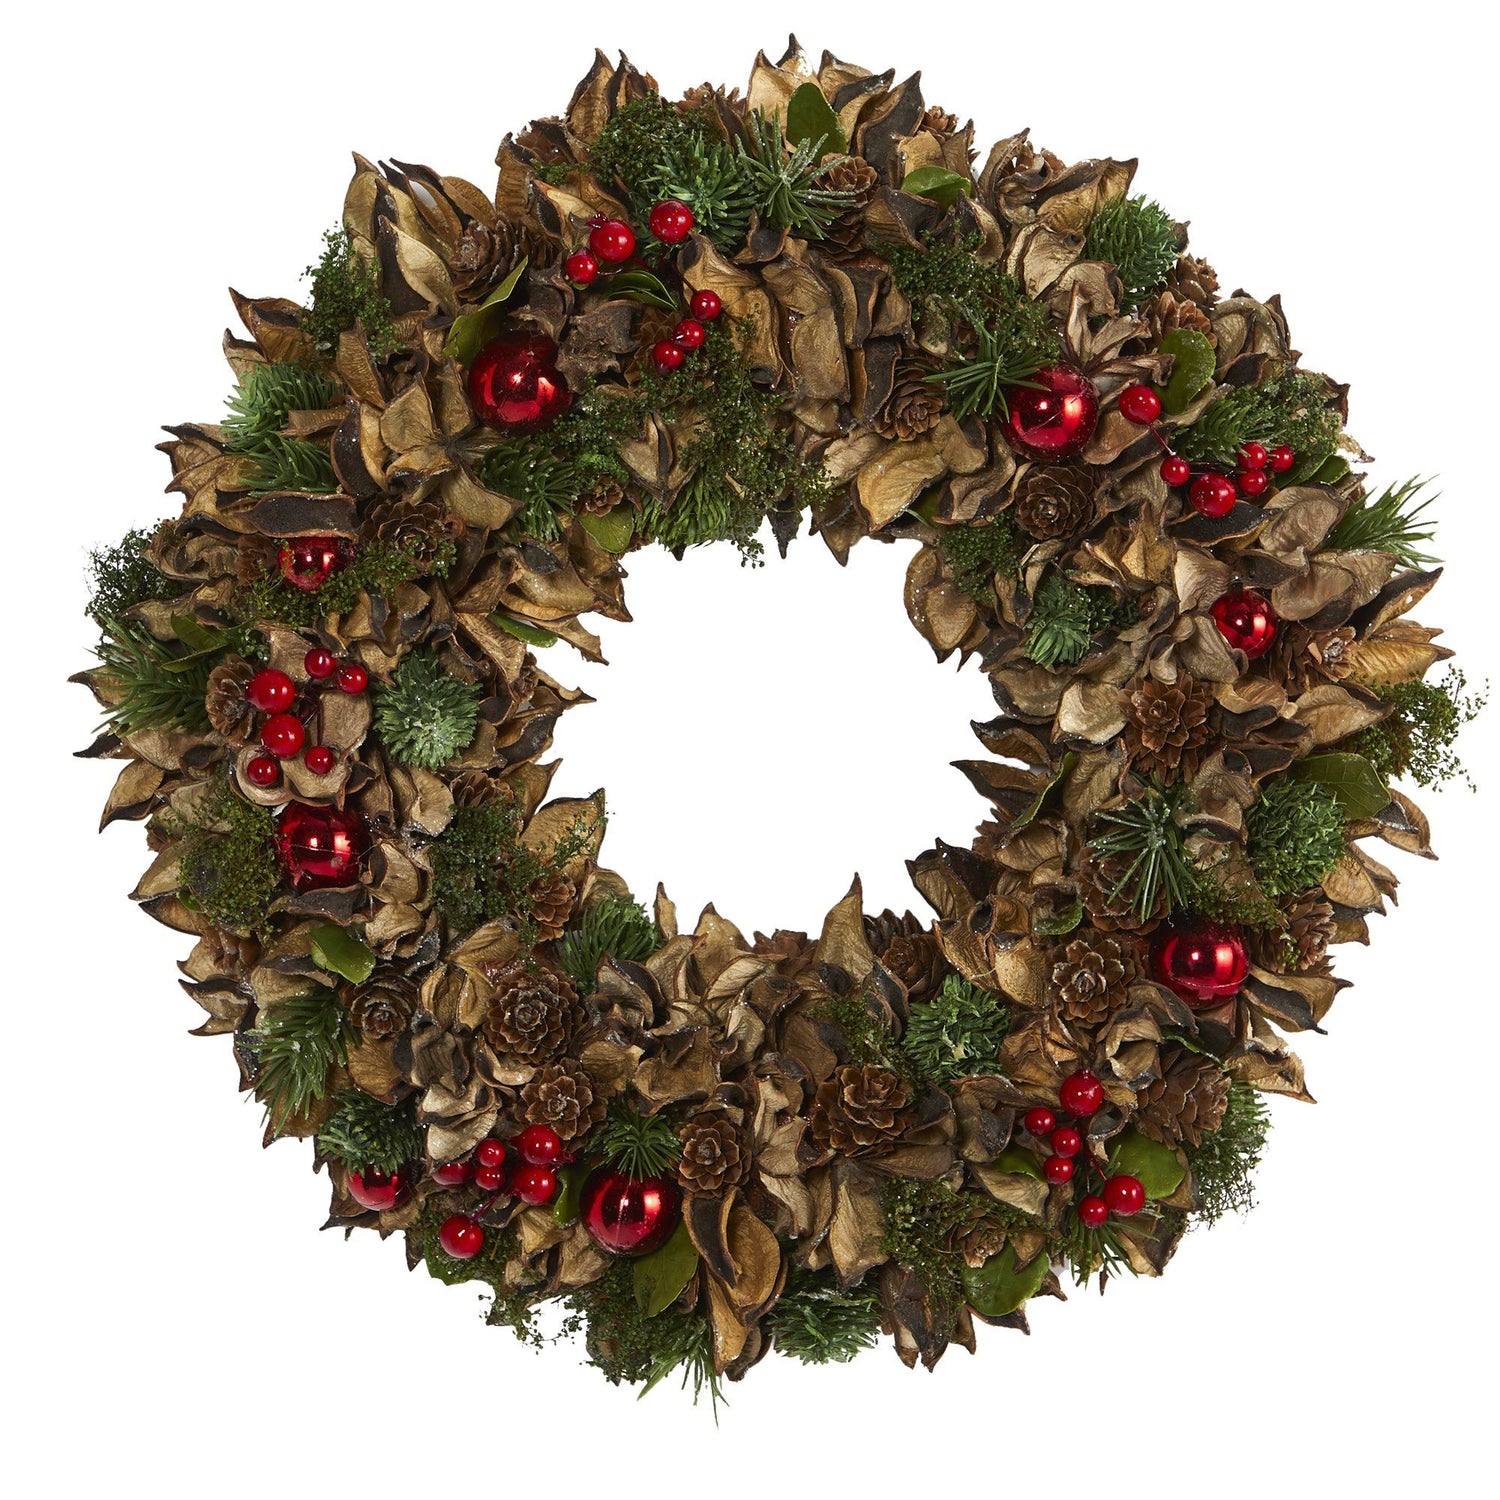 15” Holiday Artificial Wreath with Pine Cones and Ornaments